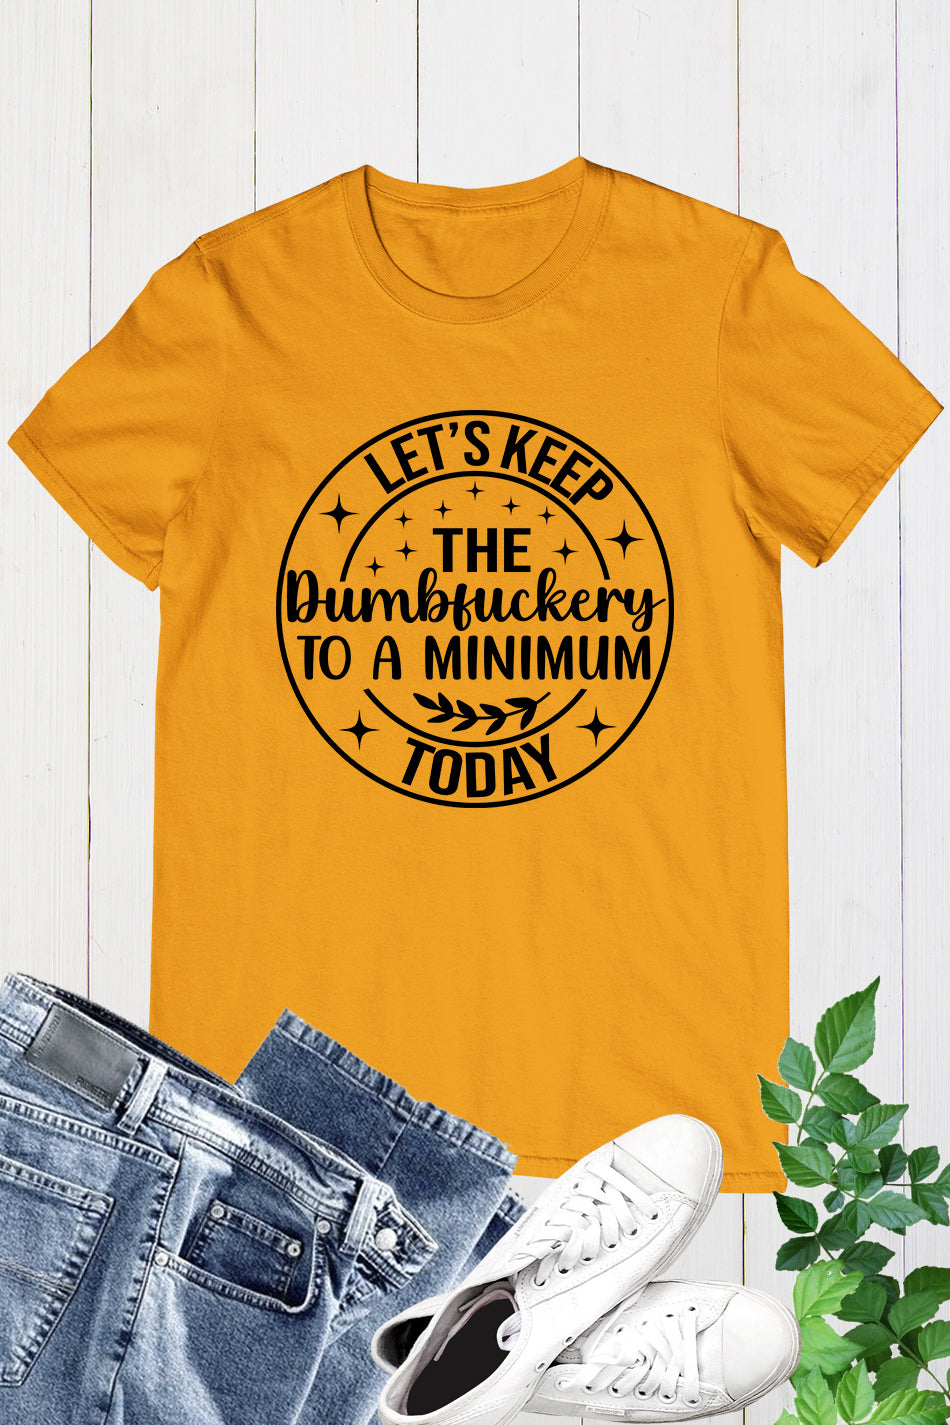 Let's Keep The Dumbfuckery To a Minimum Today Shirts